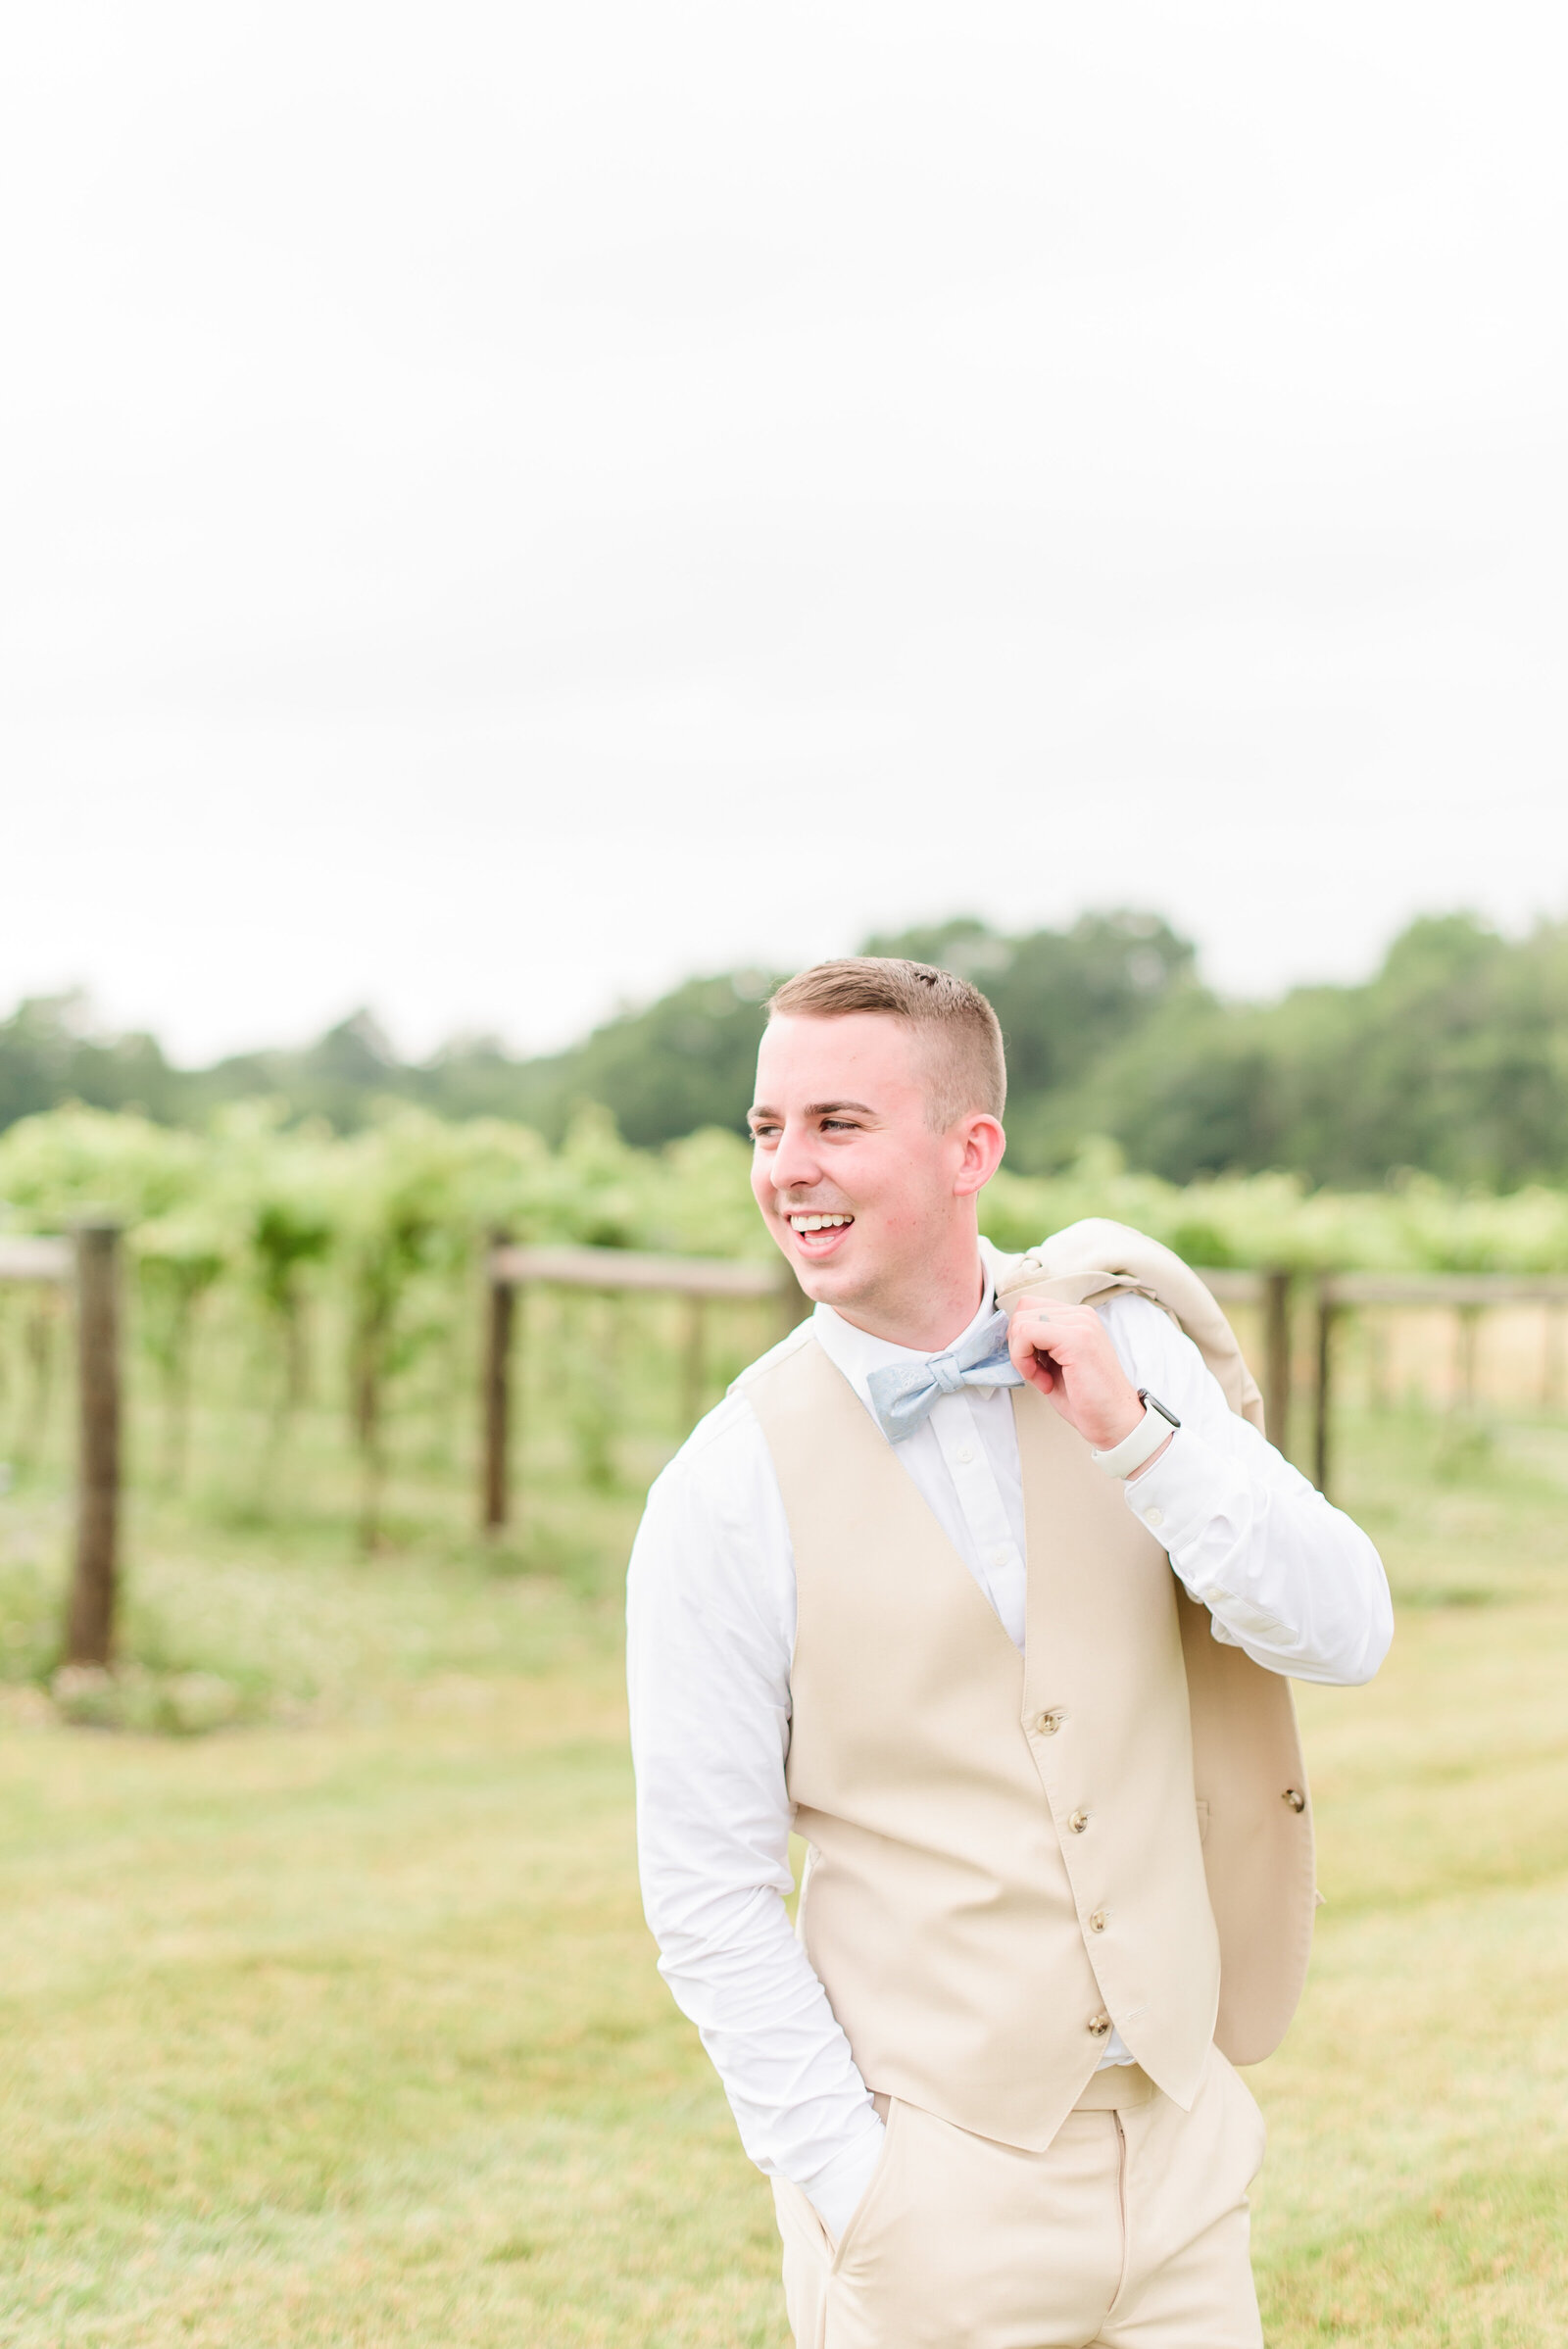 Groom Portraits at The Sycamore at Mallow Run